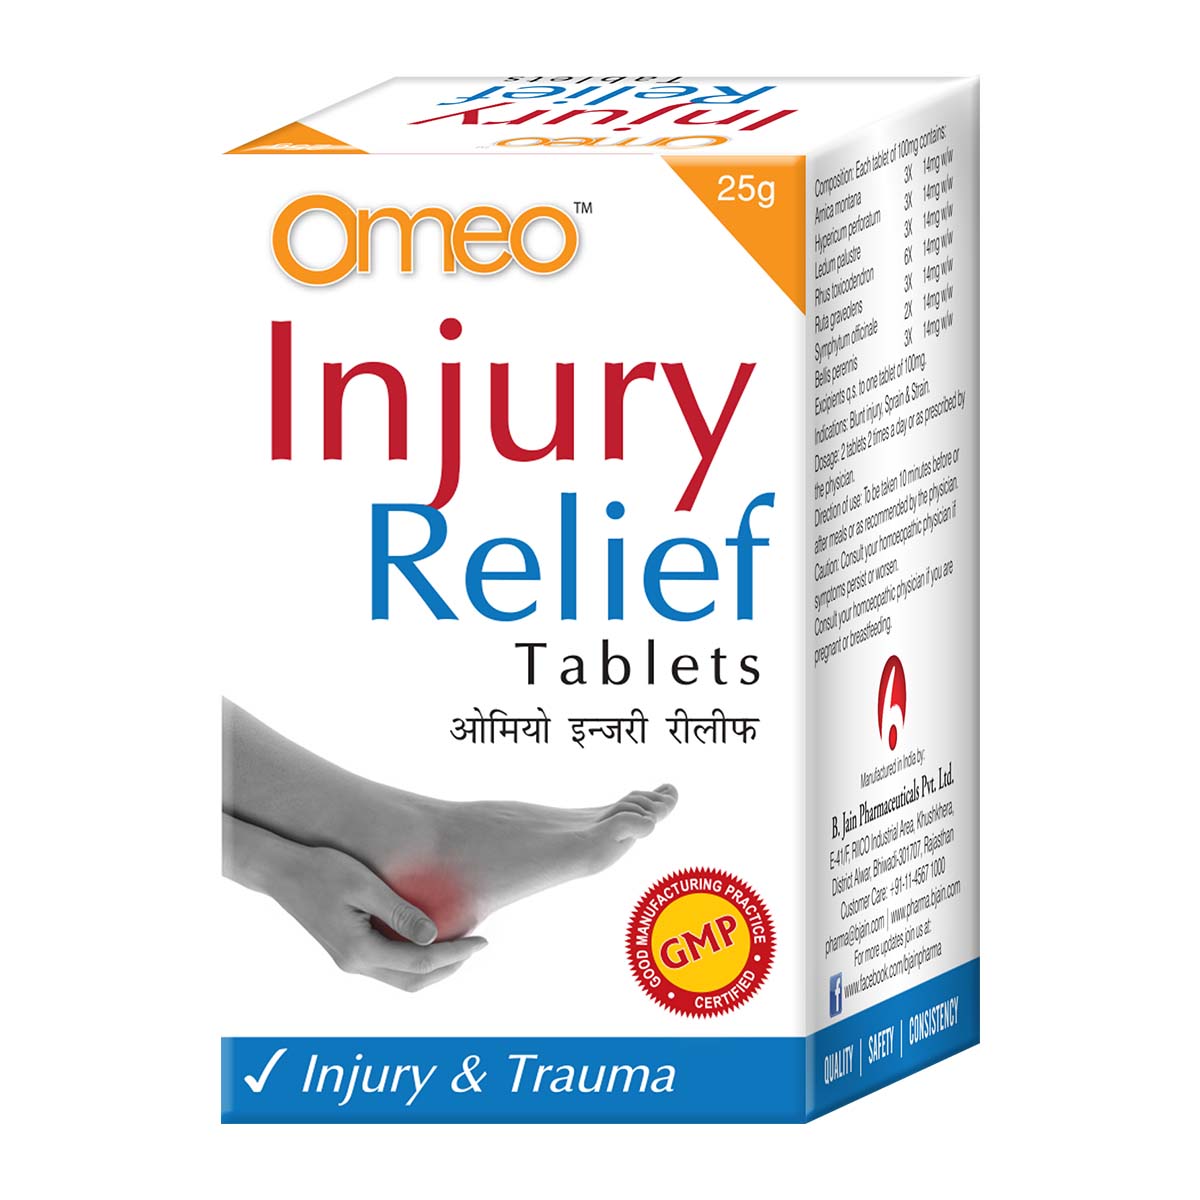 BJain Omeo Injury Relief Tablets Online